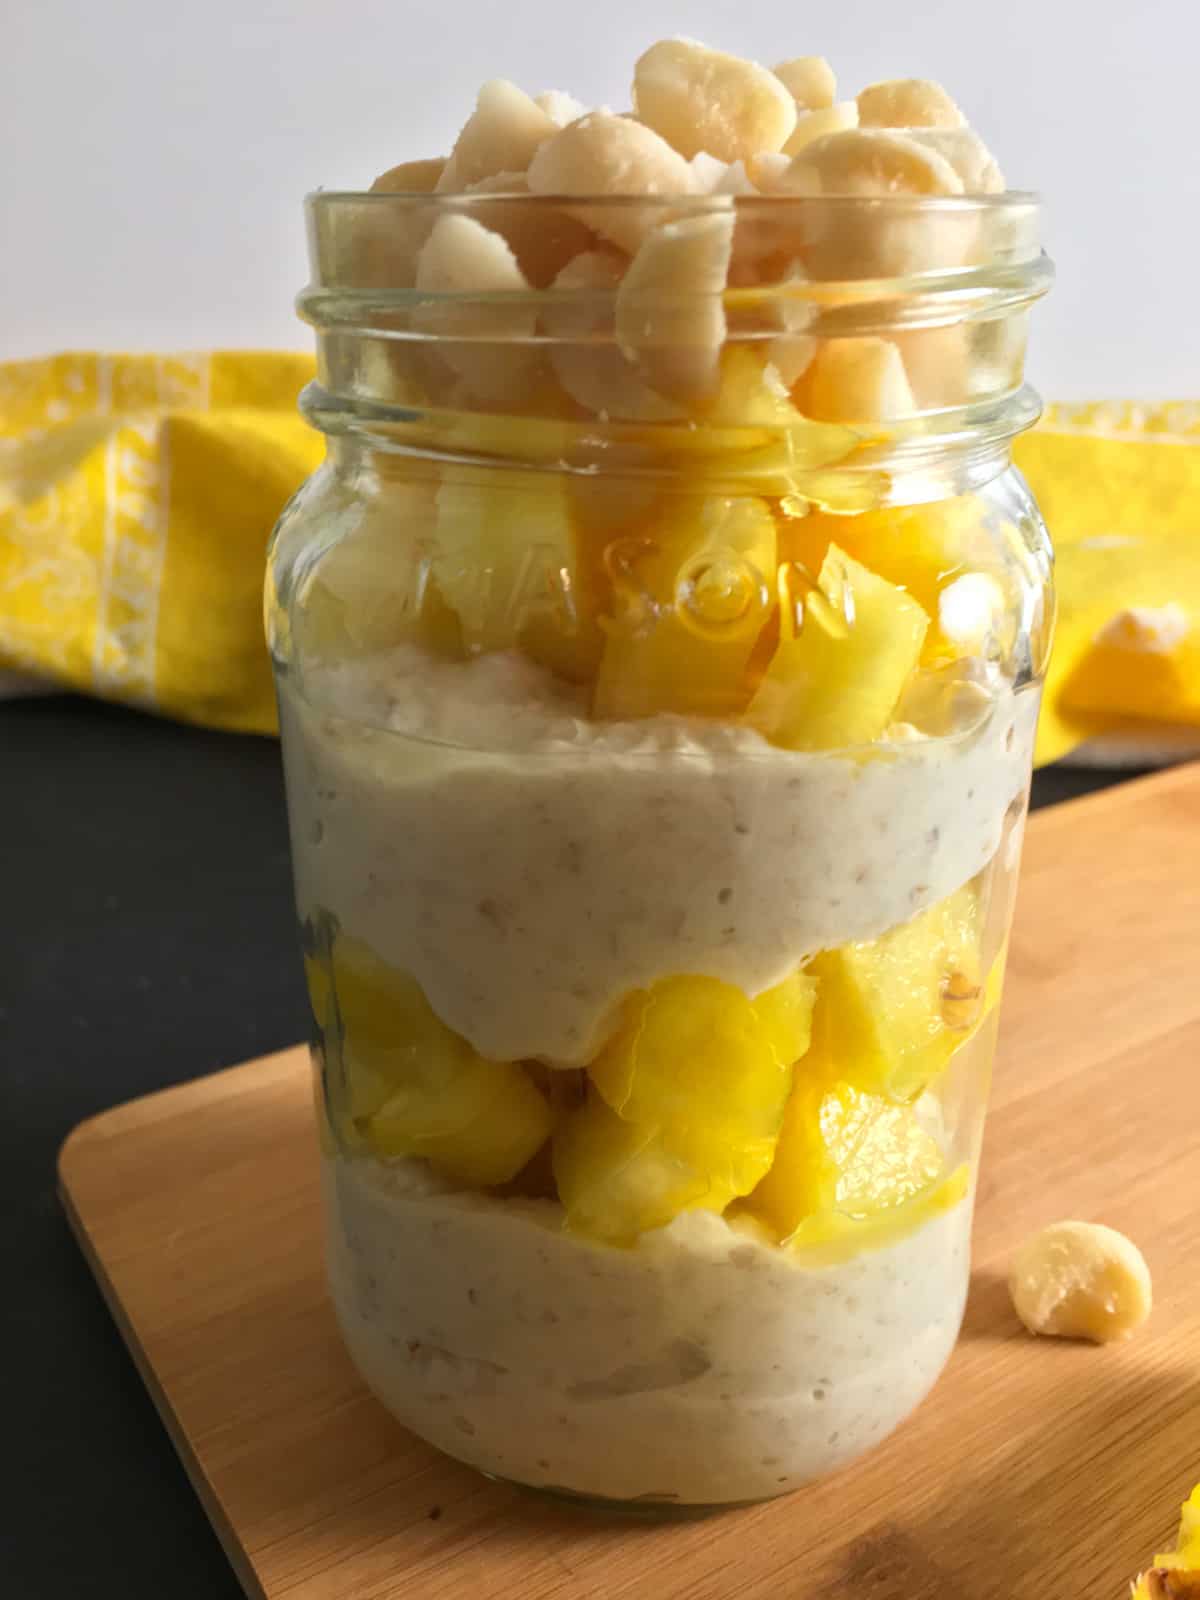 Pineapple overnight oats without sugar